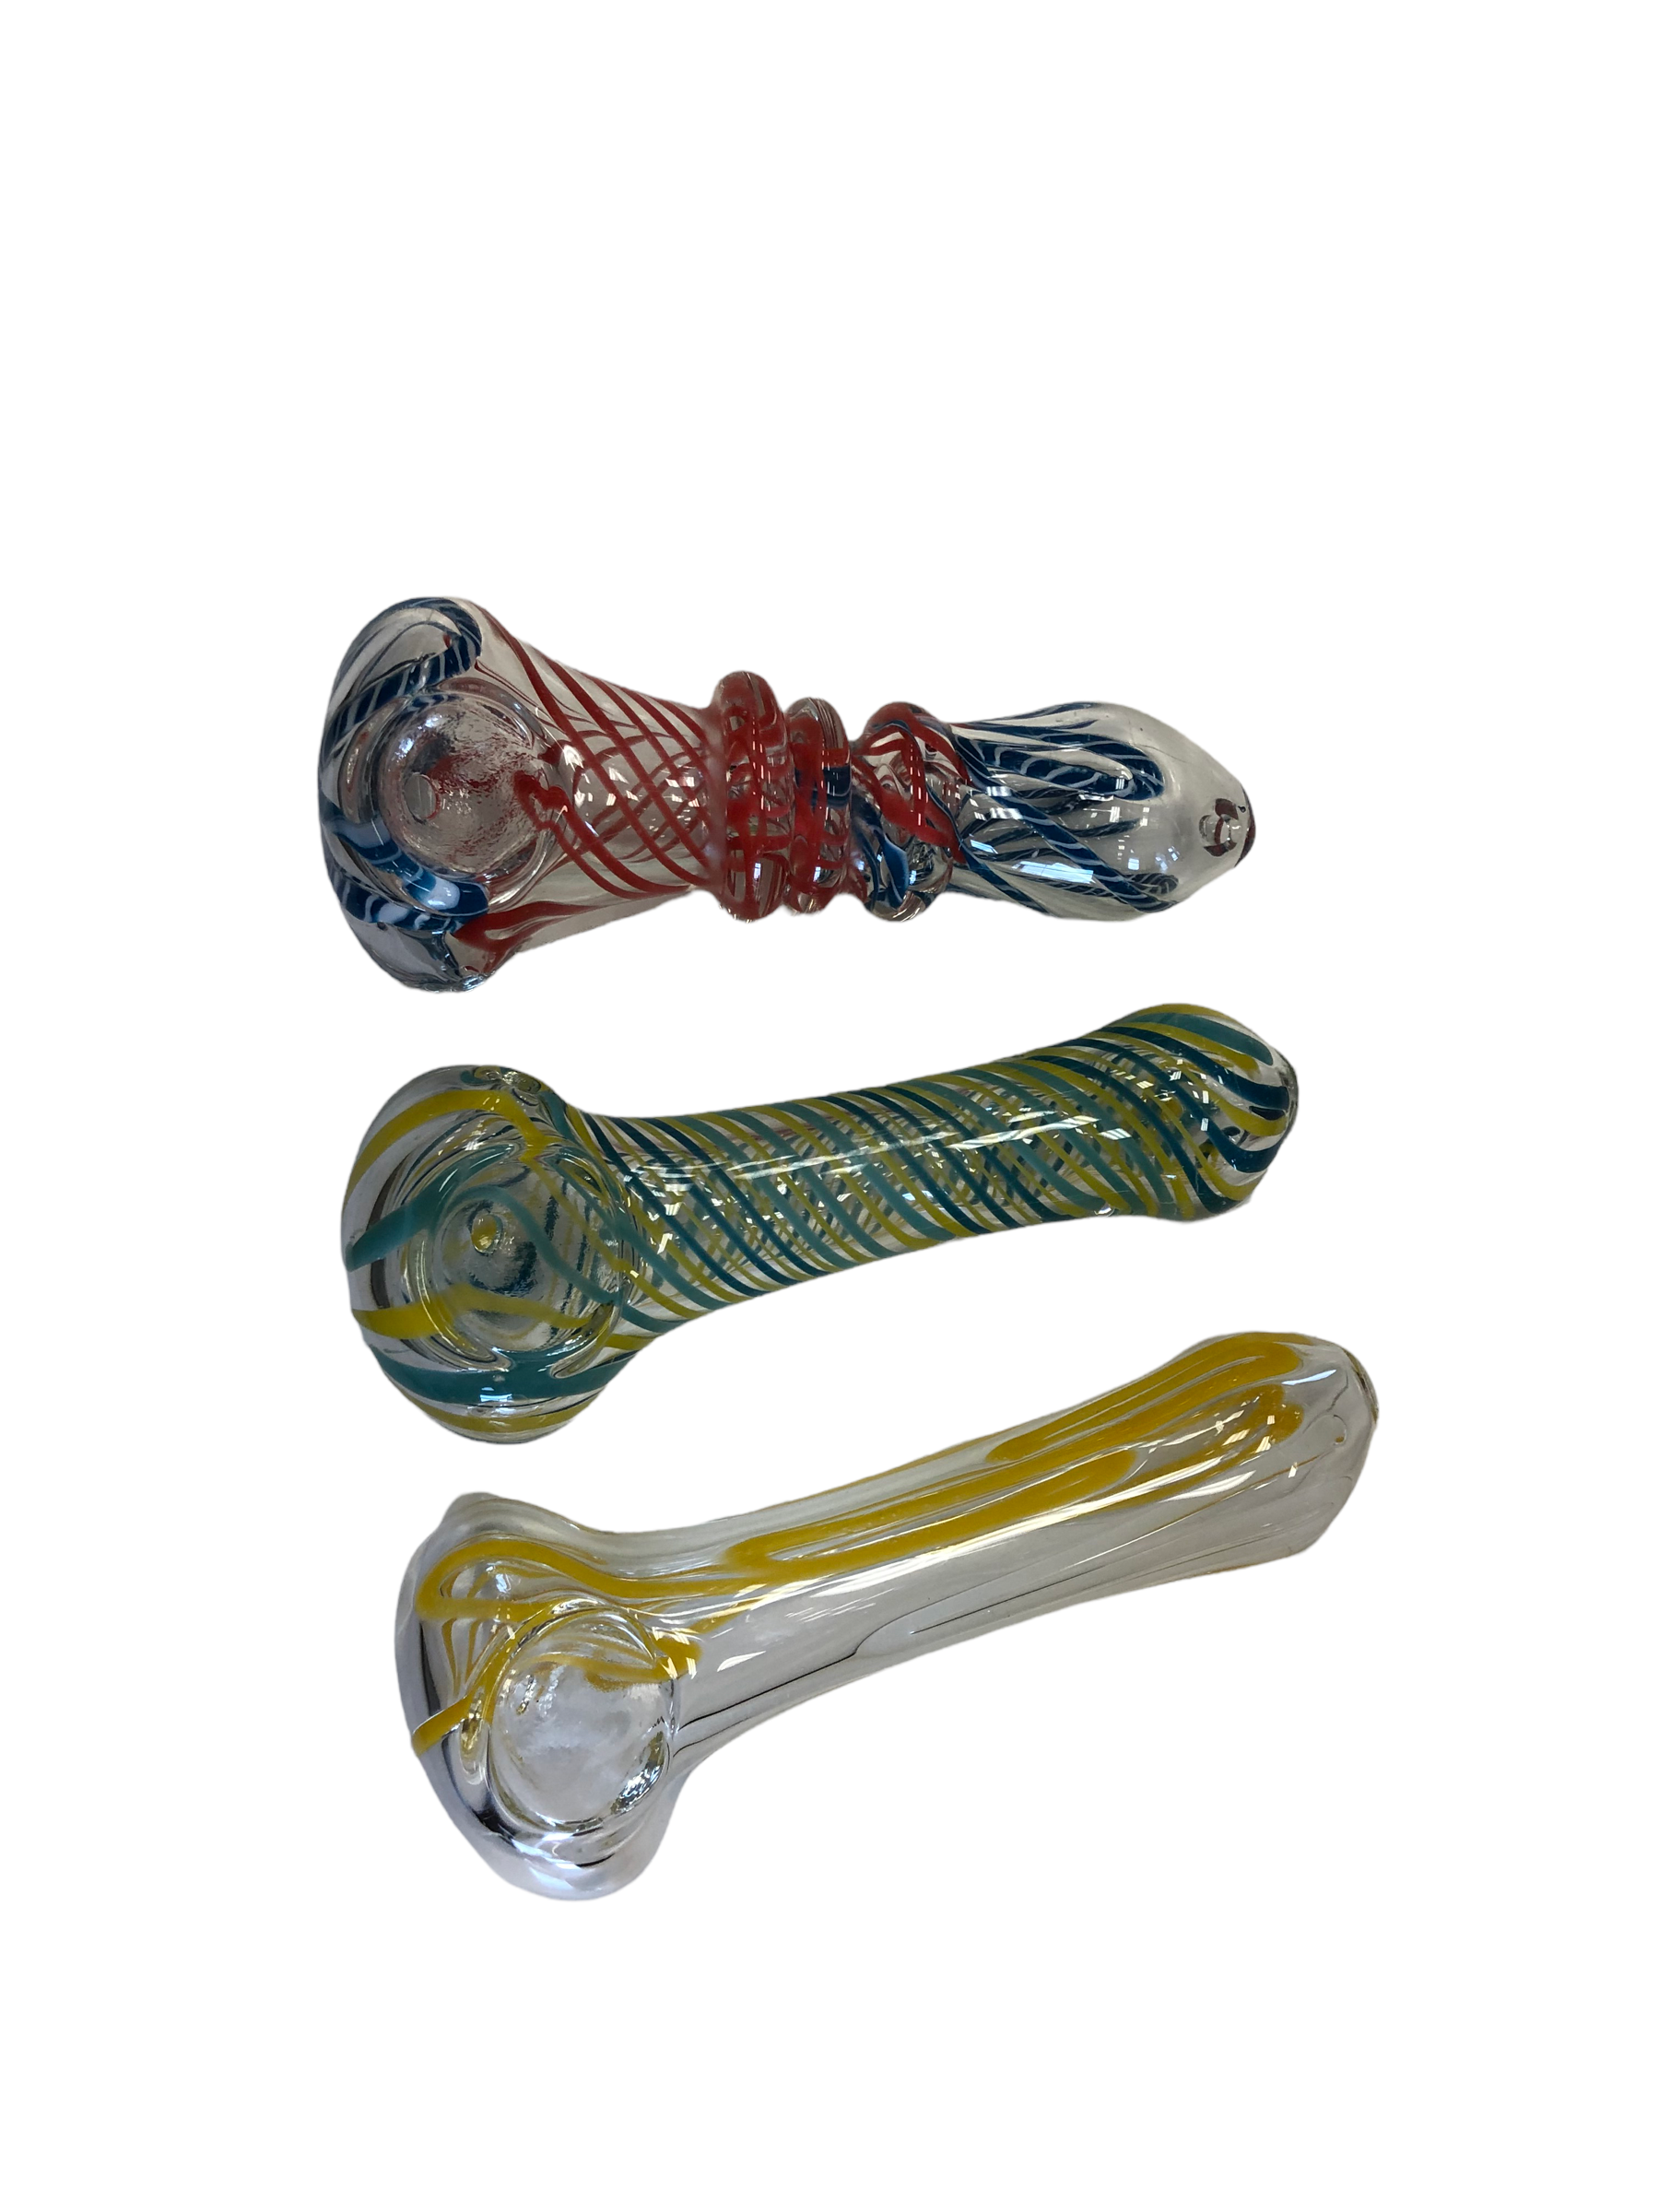 IN-OUT | 4" GLASS PIPE JAR 35 PCS